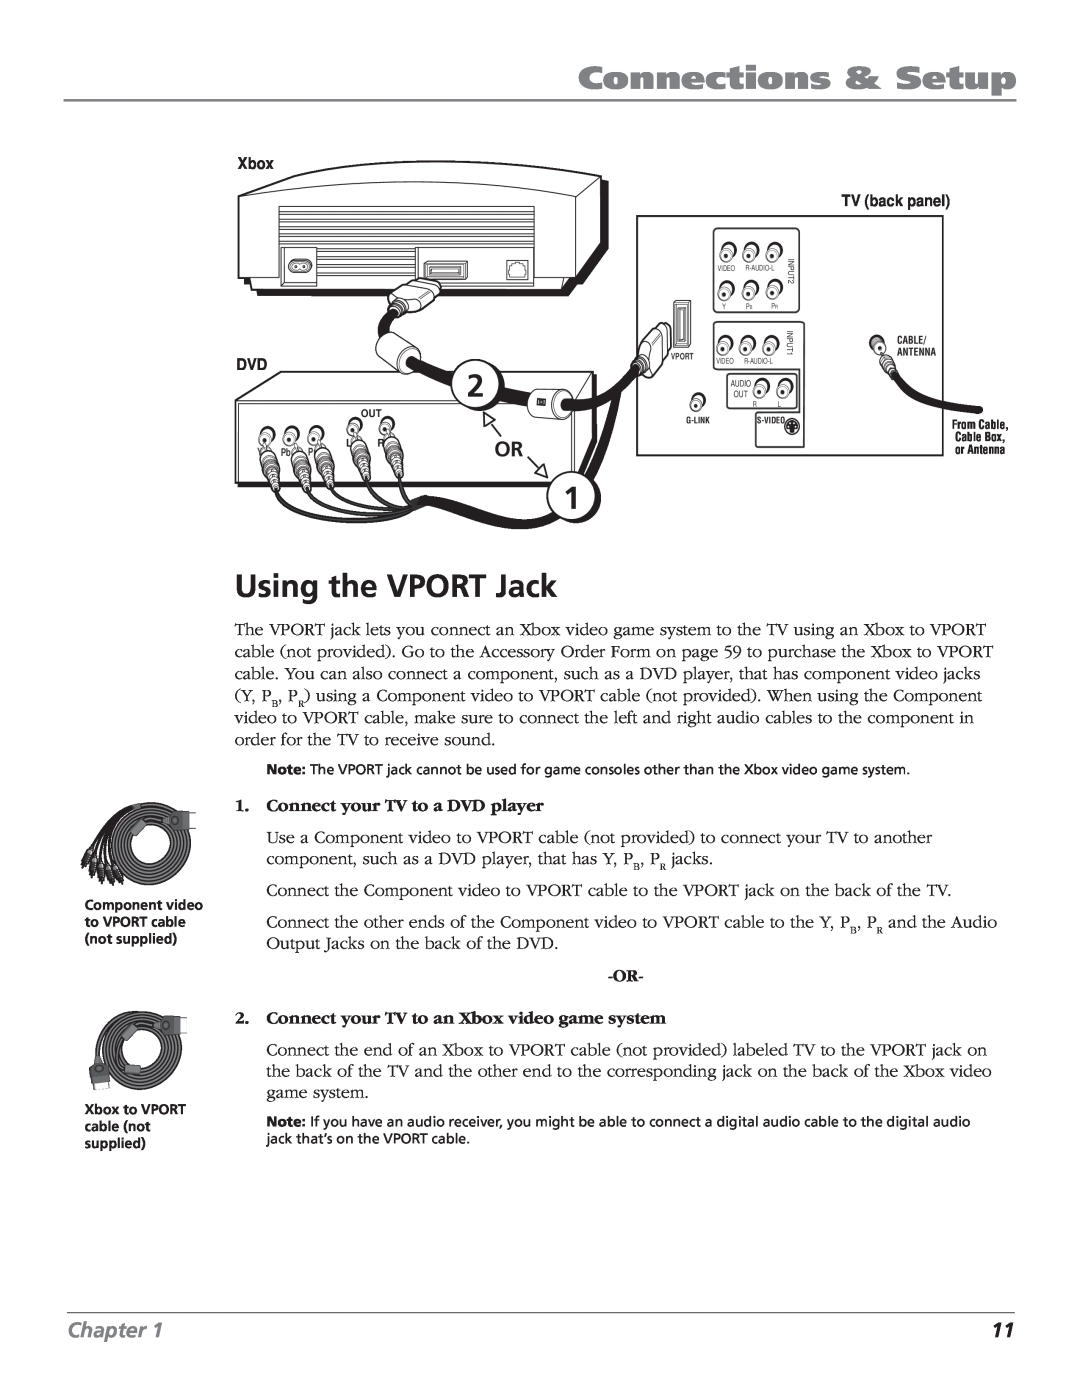 RCA MR68TF700 manual Using the VPORT Jack, Connections & Setup, Chapter, Connect your TV to a DVD player 